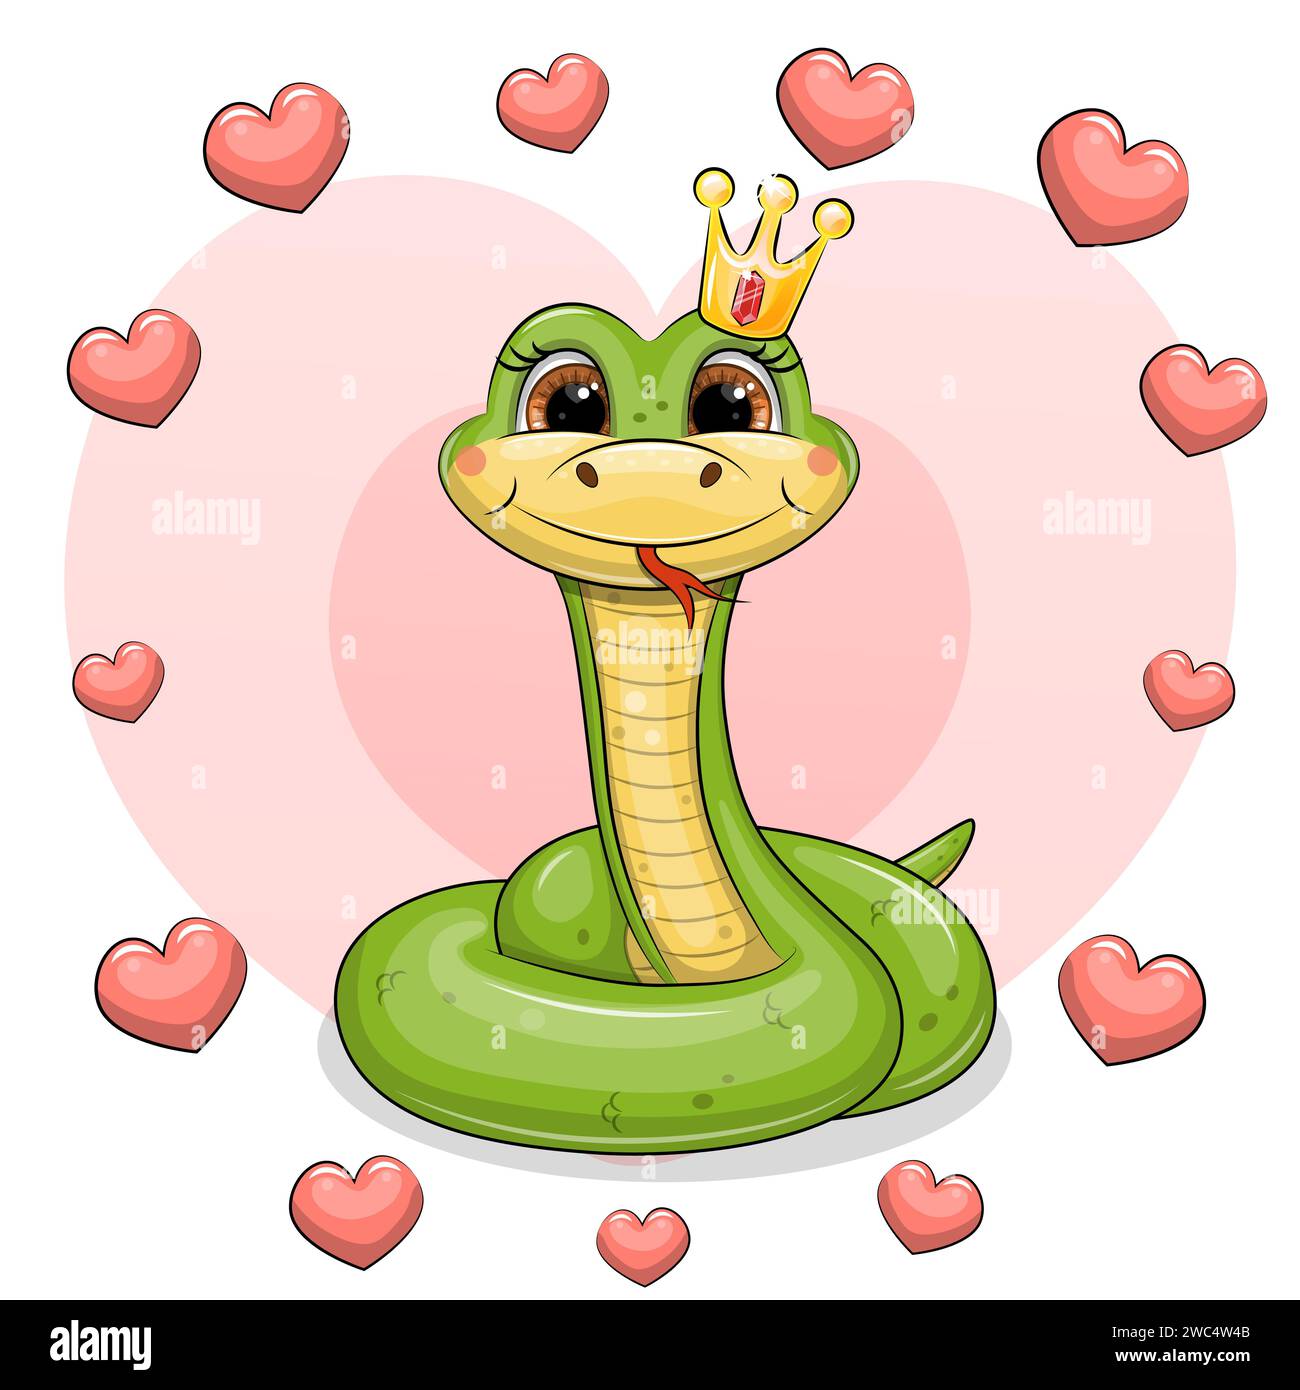 Cute cartoon green snake with a crown in a heart frame. Vector illustration of an animal on a red background. Stock Vector